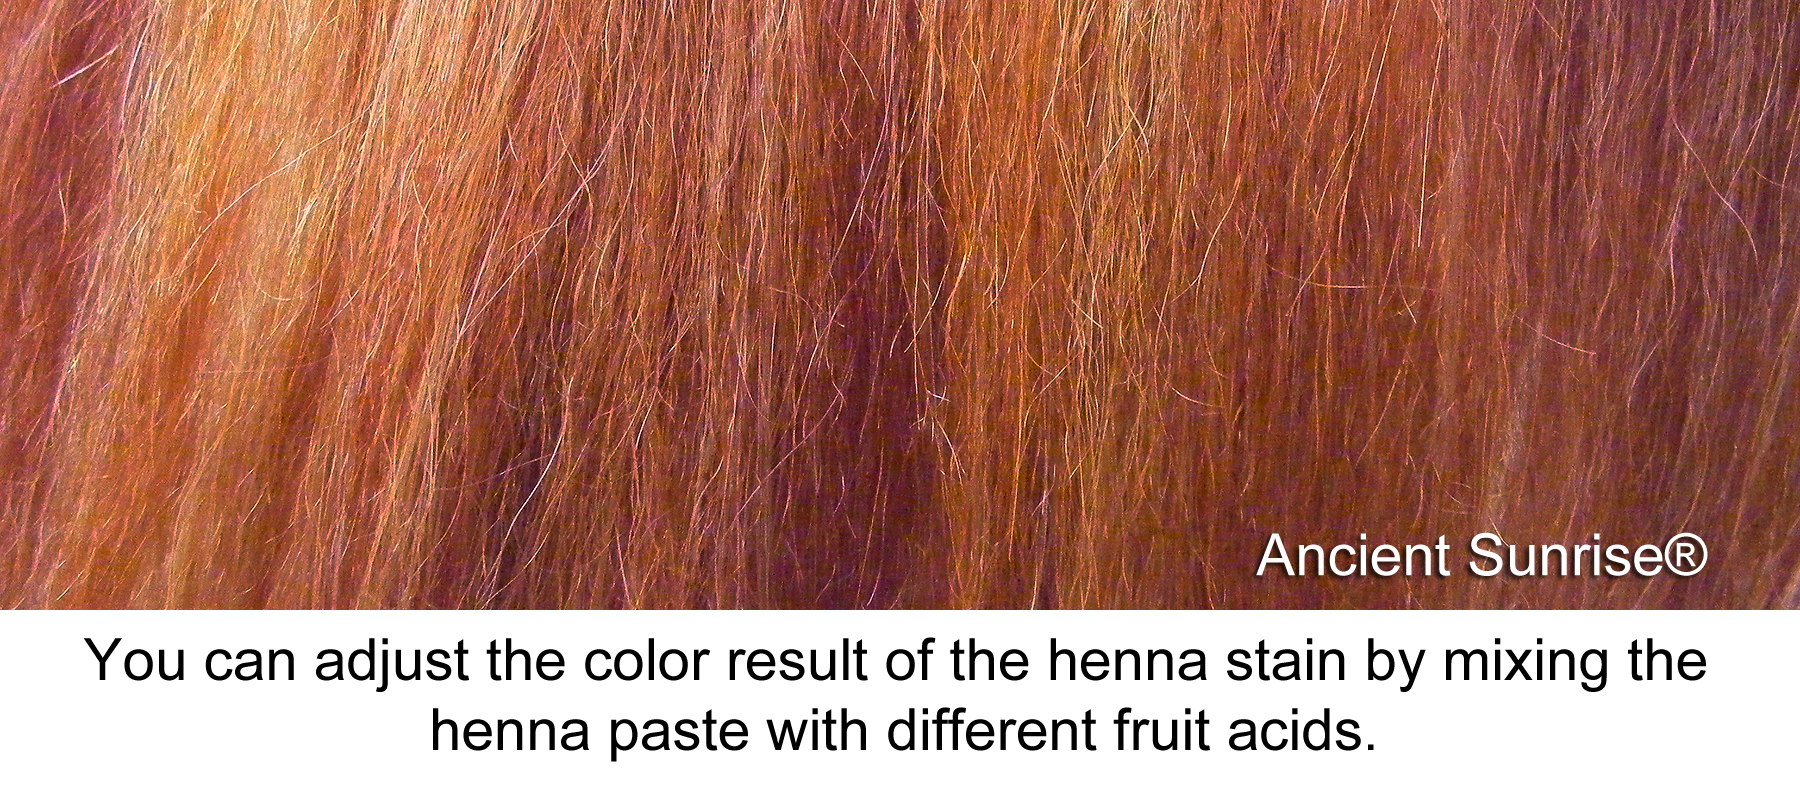 Different Fruit Acids and Henna